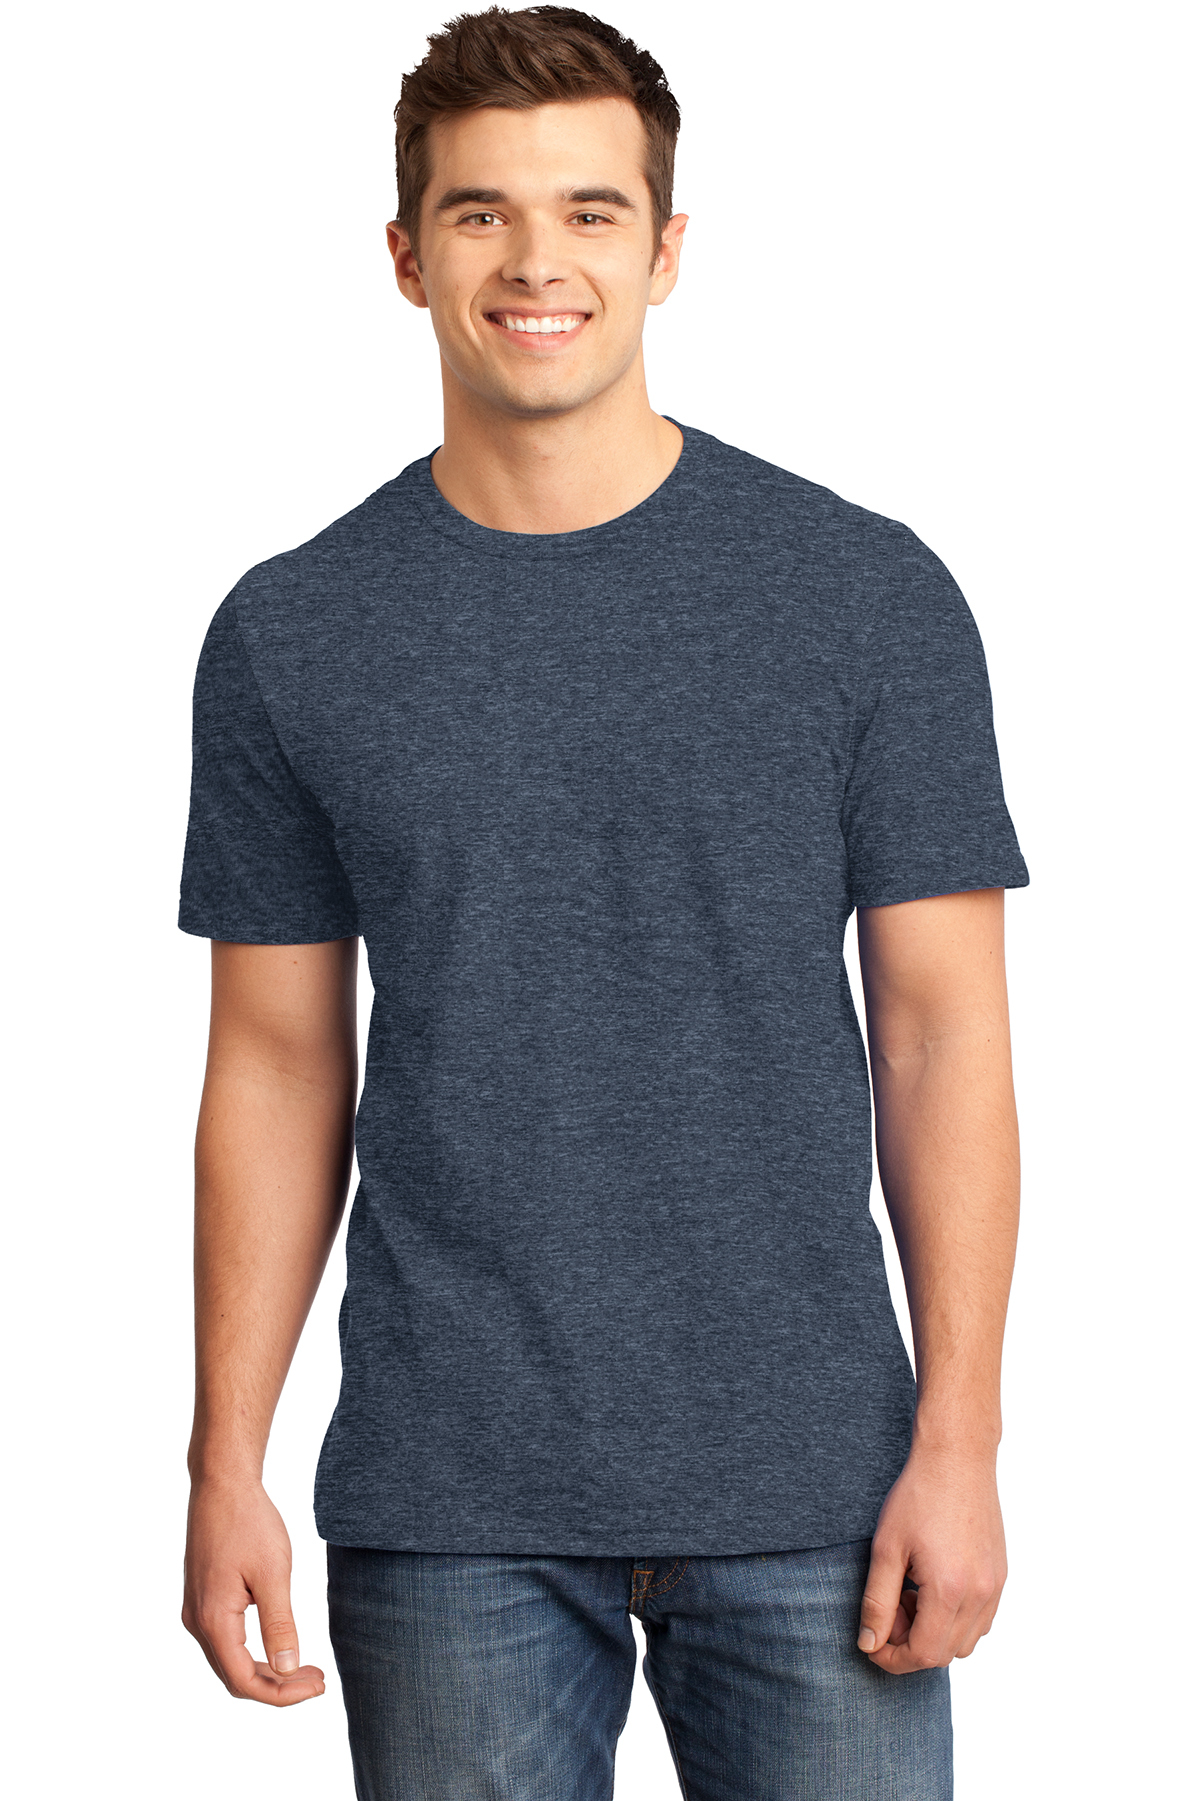 click to view Heathered Navy